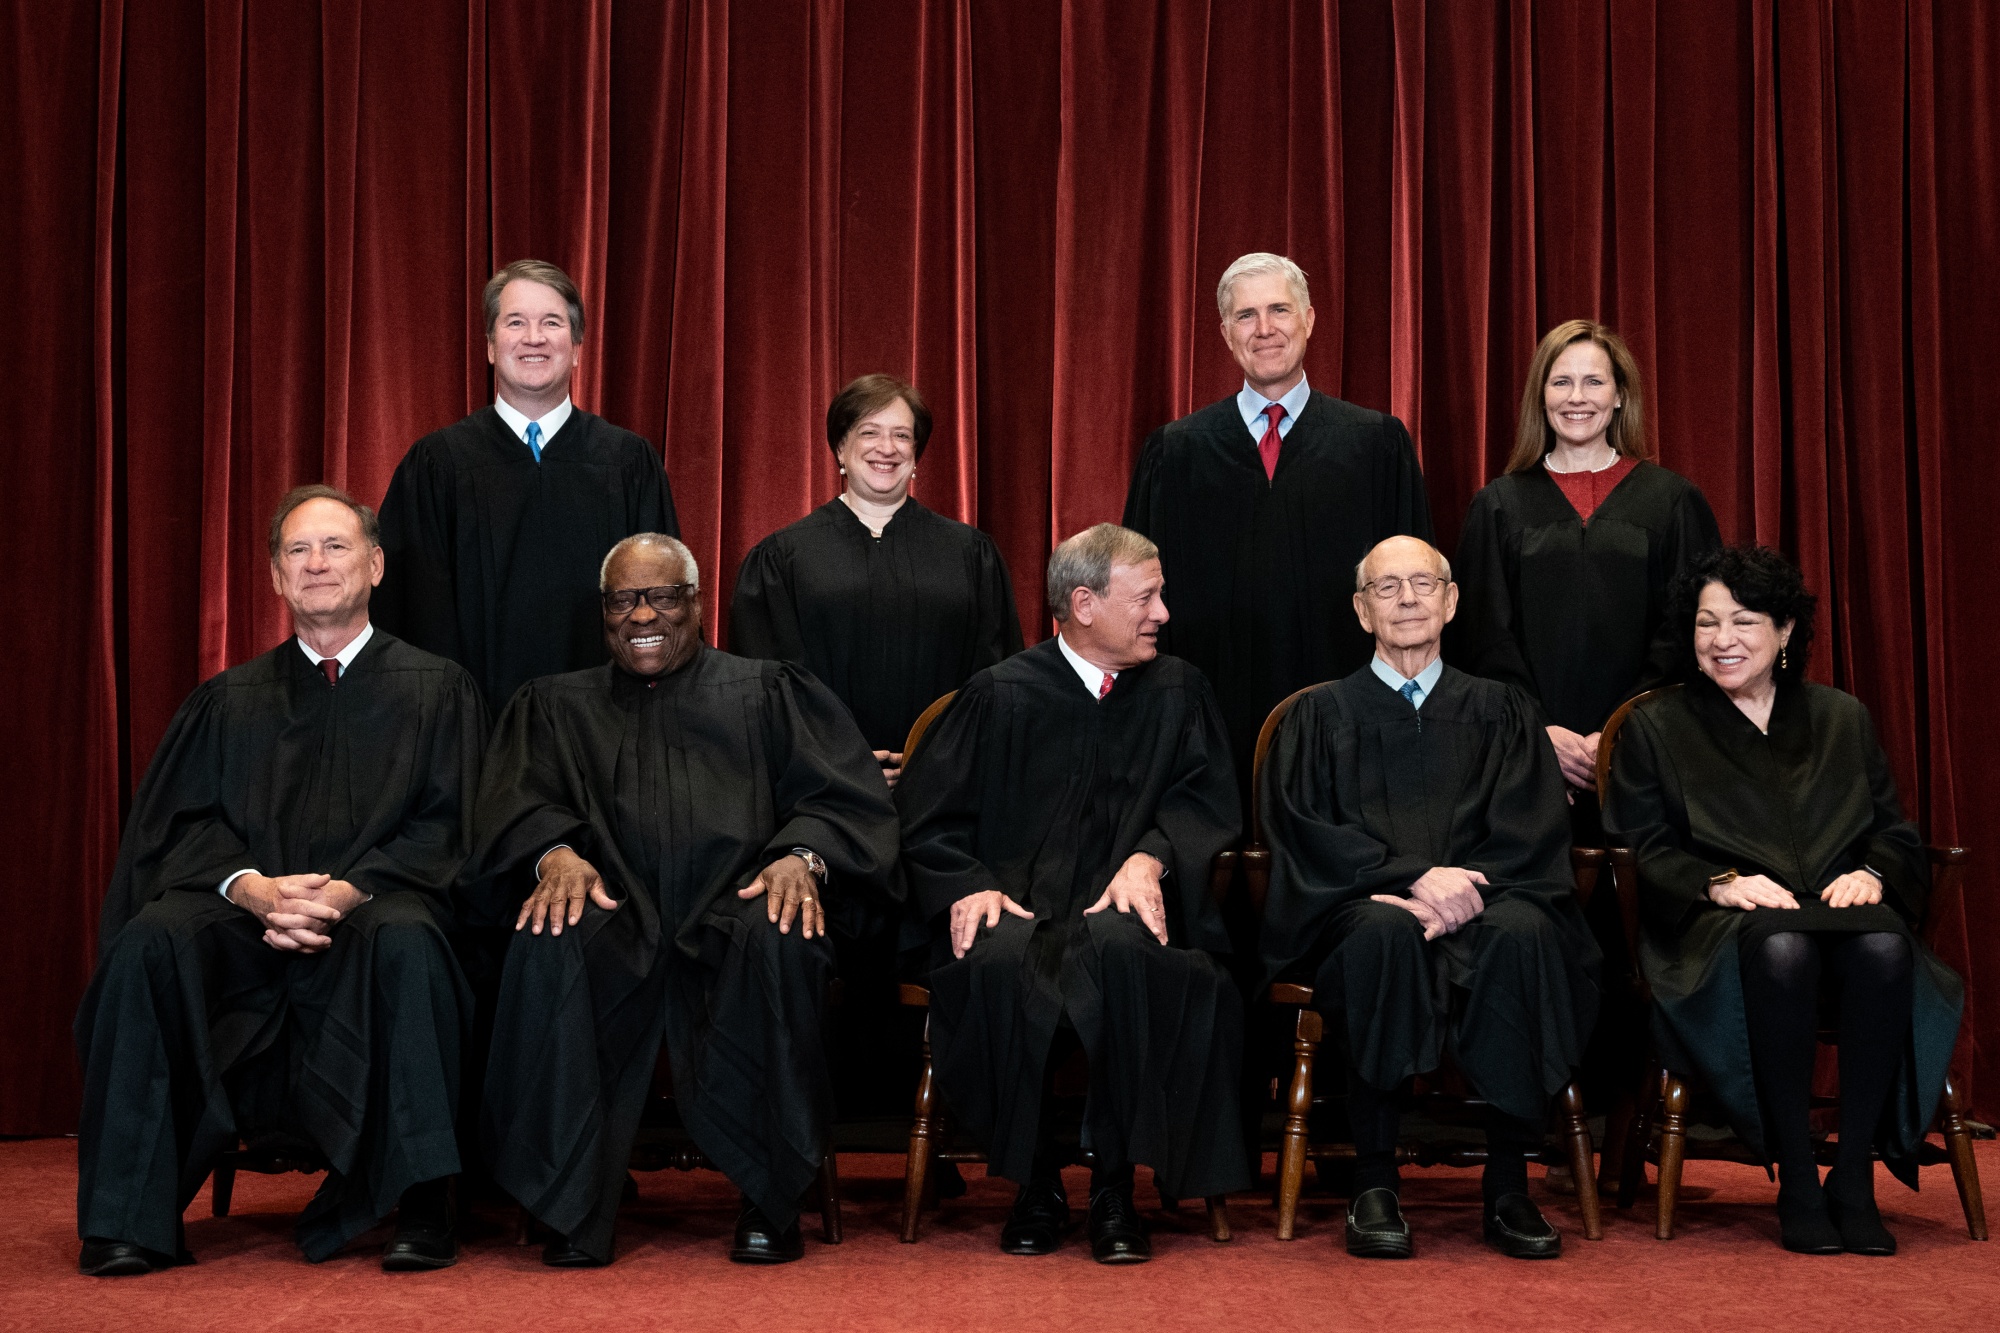 Justices of the U.S. Supreme Court 